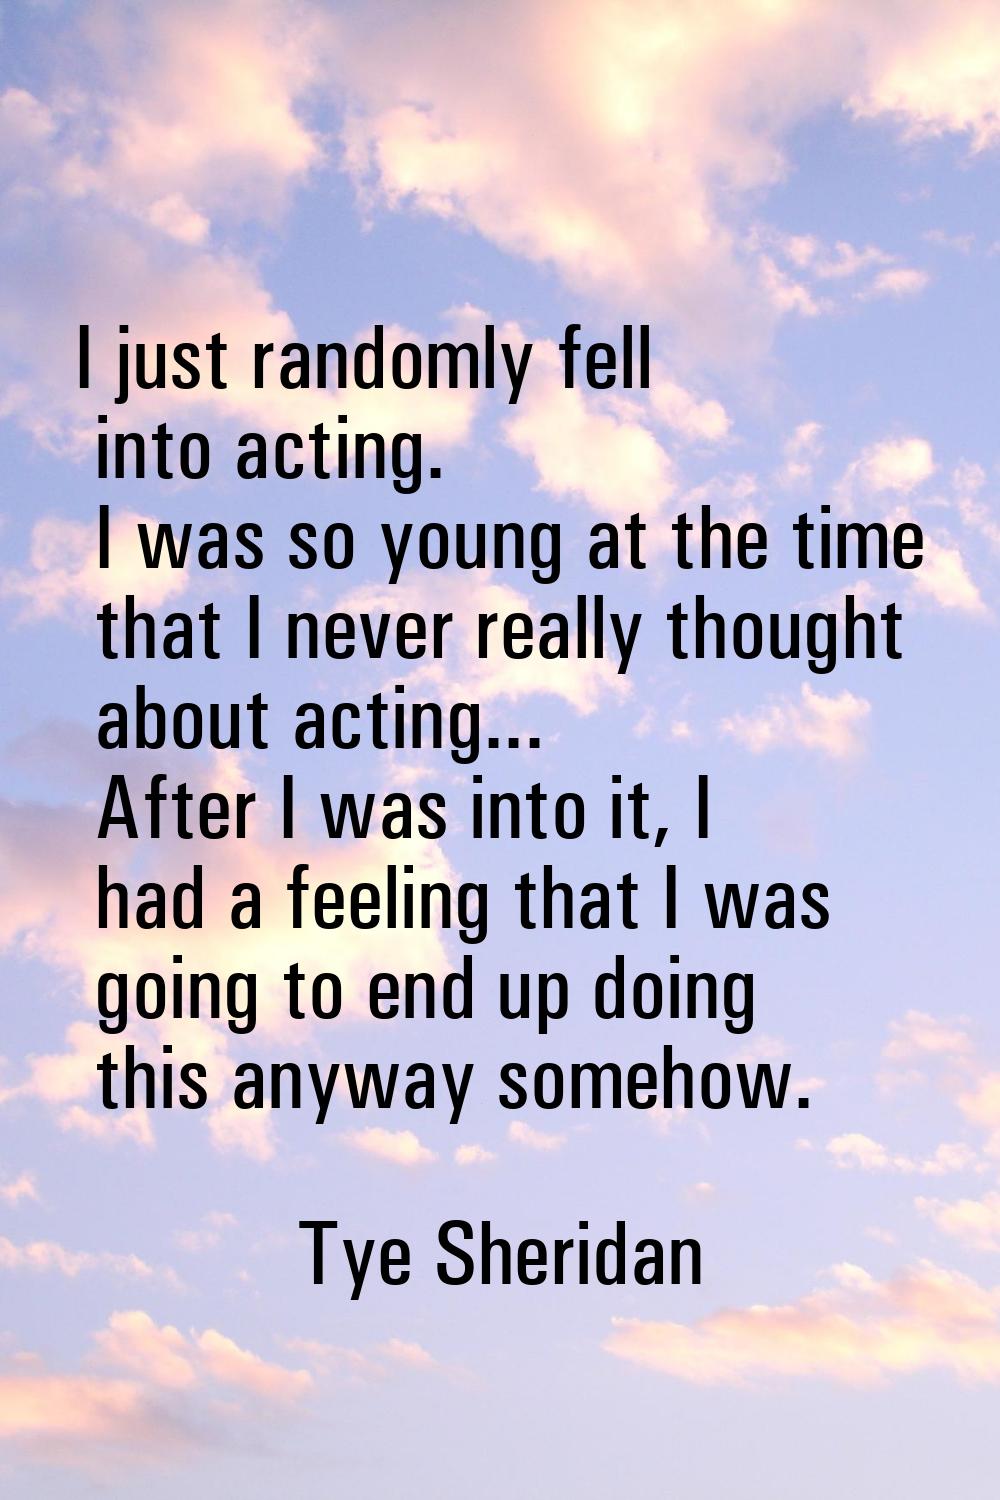 I just randomly fell into acting. I was so young at the time that I never really thought about acti